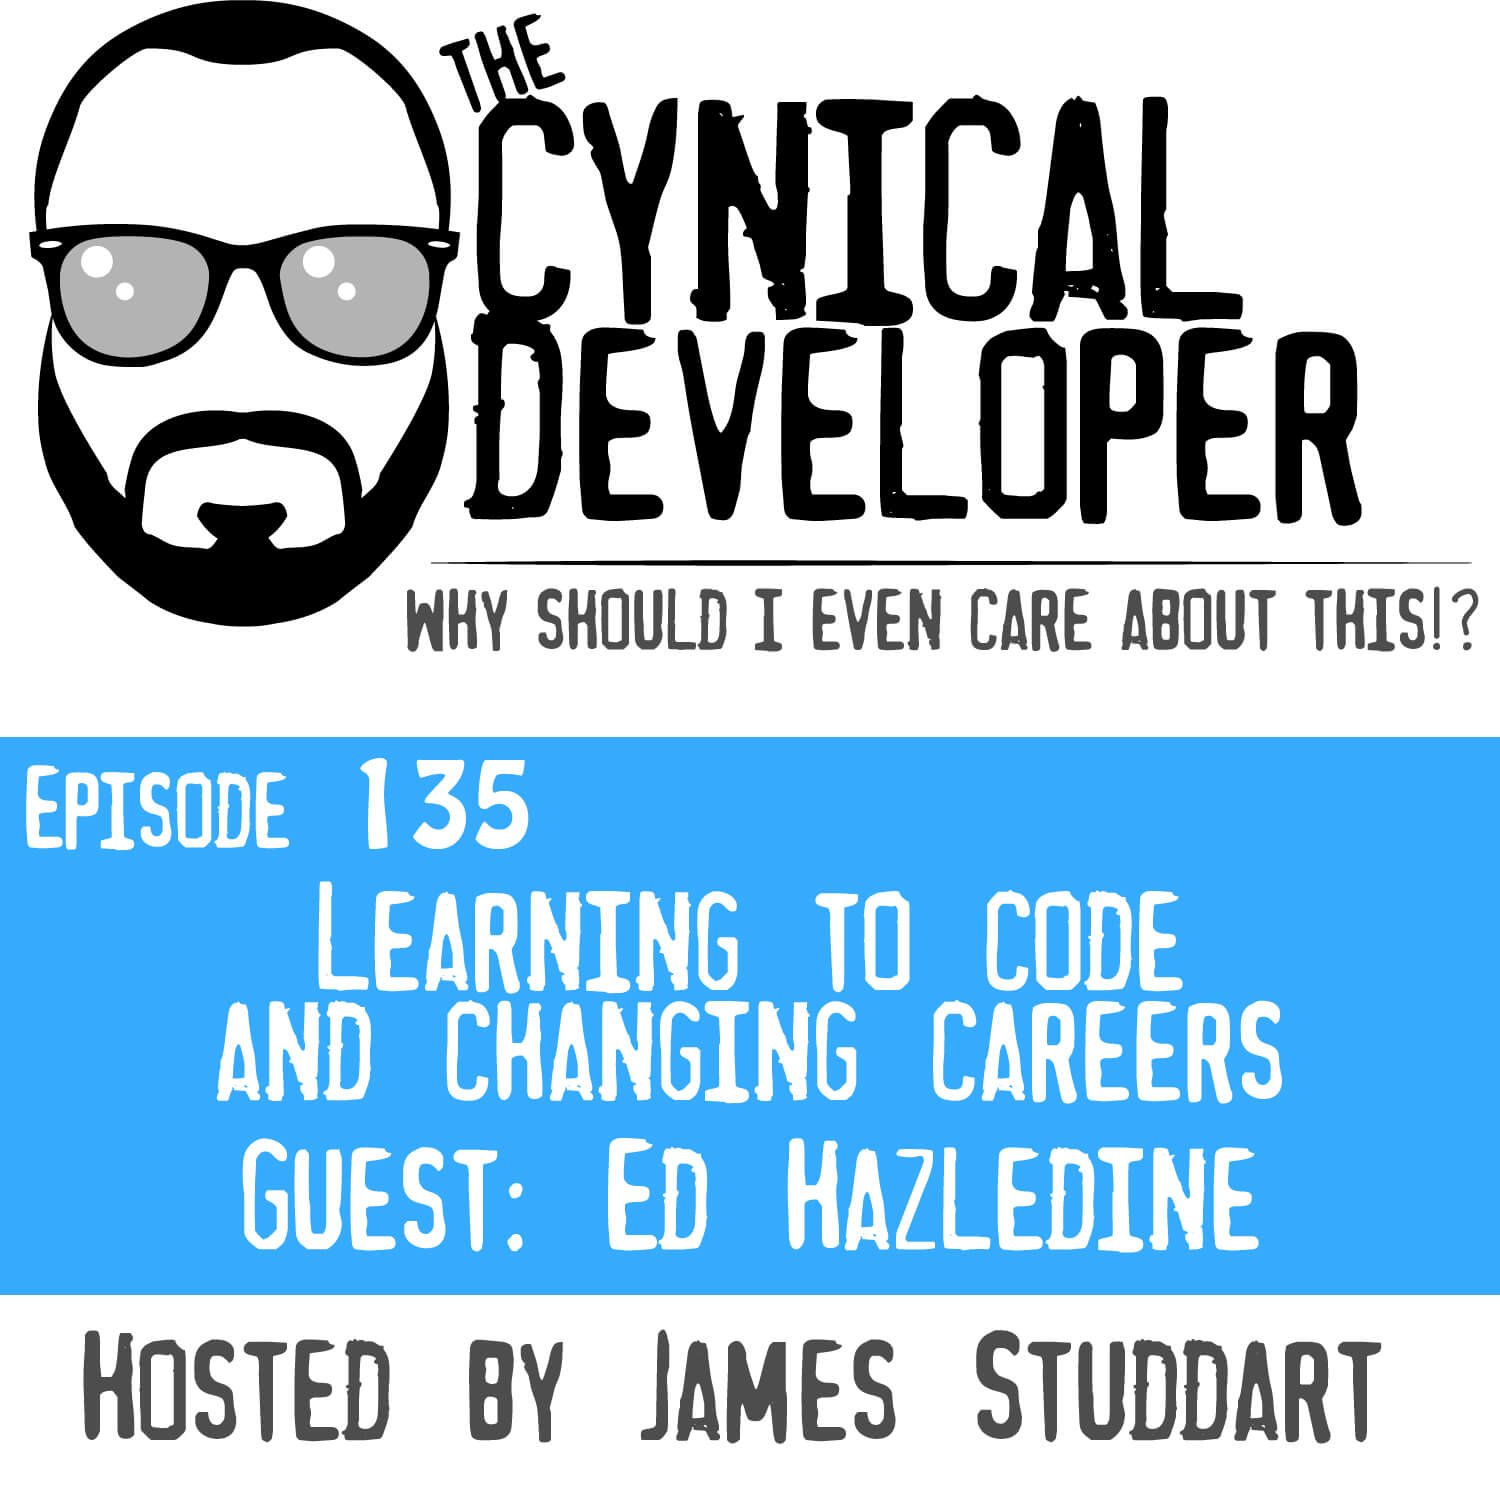 Episode 135 - Learning to code & changing careers